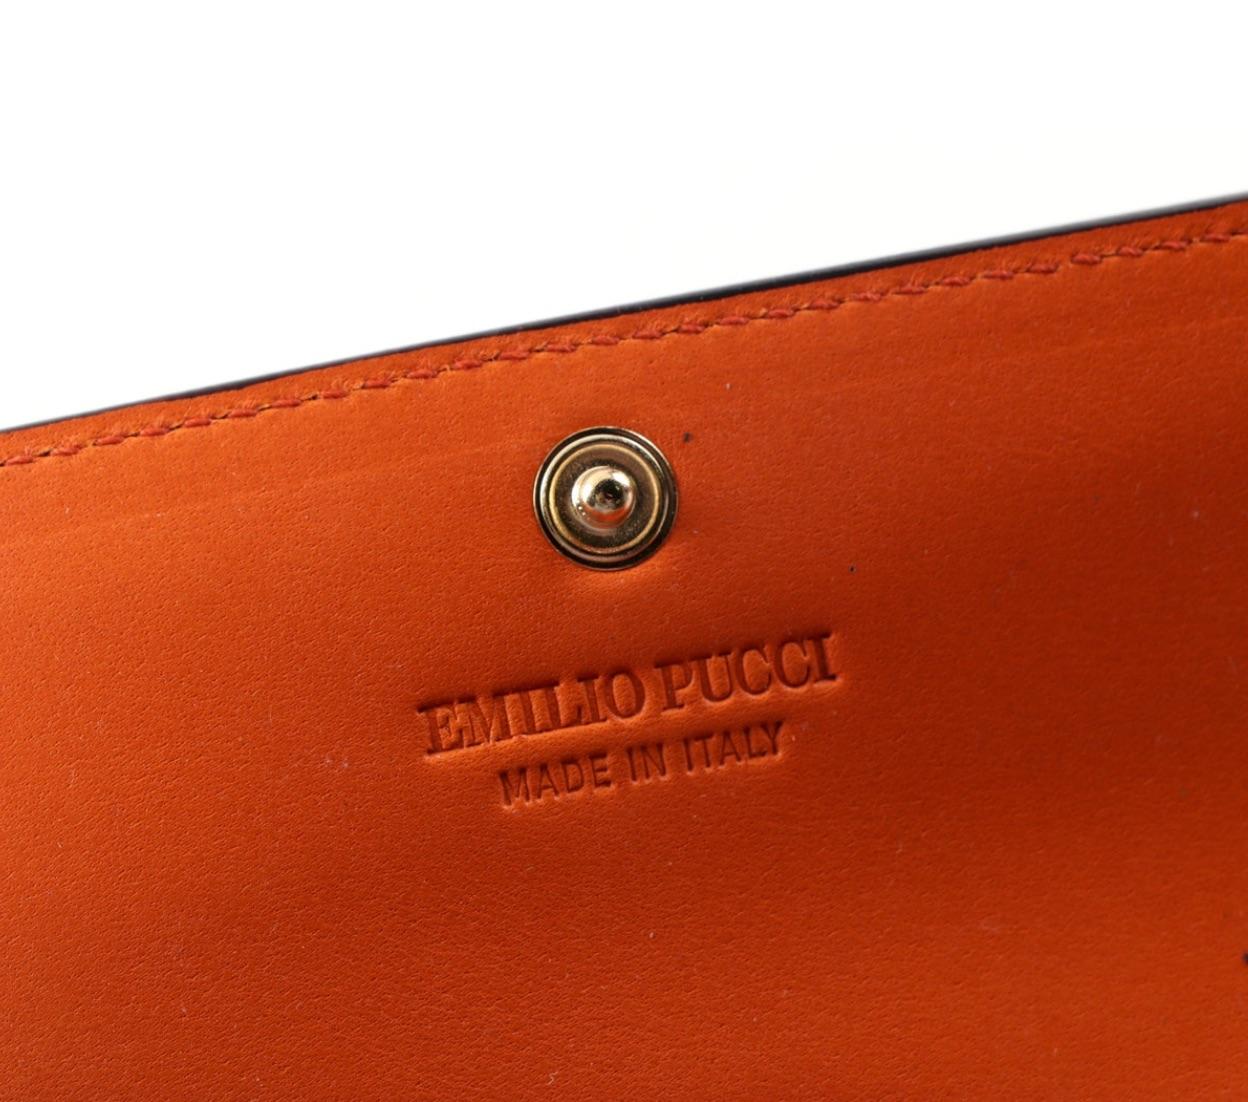 For a Fashionista by a Great Fashion Designer!
Gorgeous authentic Emilio Pucci Leather Print Wallet with a Beautiful Orange Leather Interior and Signature Pucci Fabric in the original Pucci Box with label. Portfolio Style with 2 Pockets on either